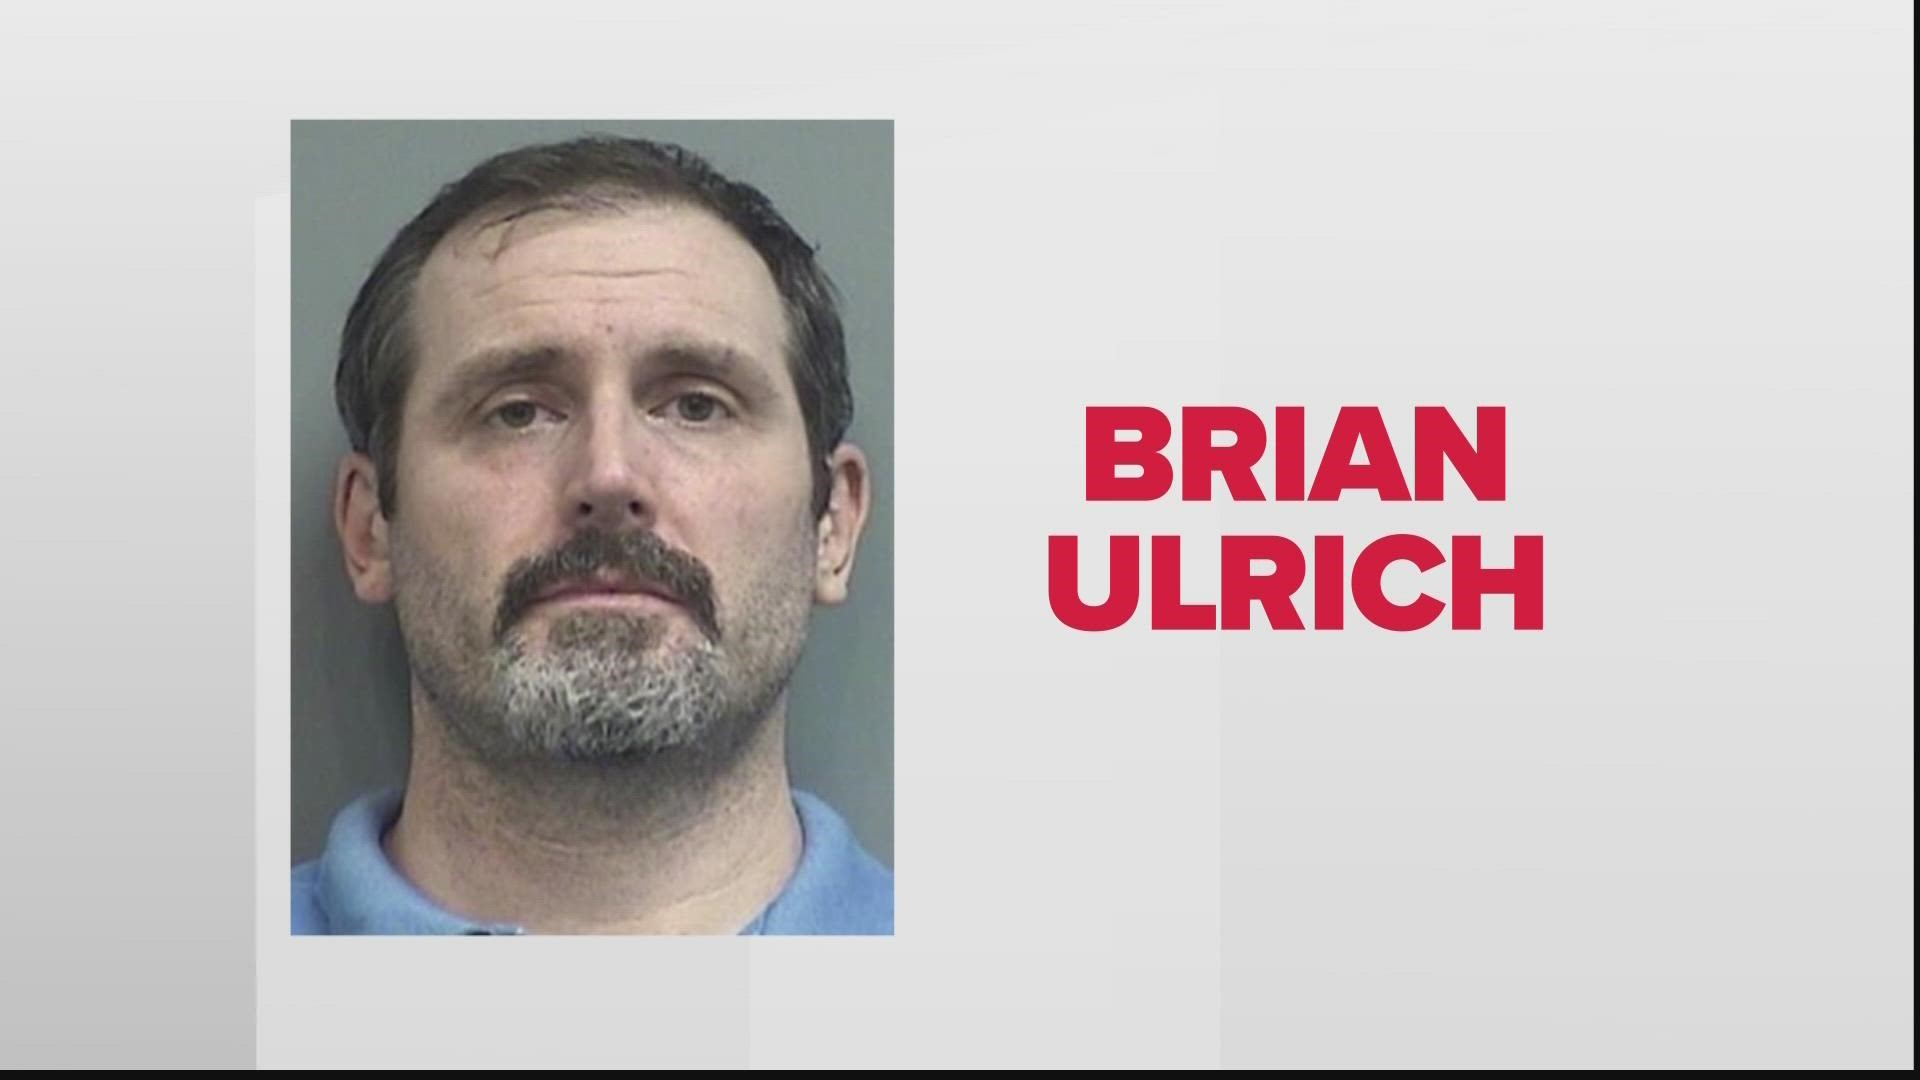 Brian Ulrich faces up to 40 years in prison combined for pleading guilty to two charges, though the government will recommend less as part of a plea deal.